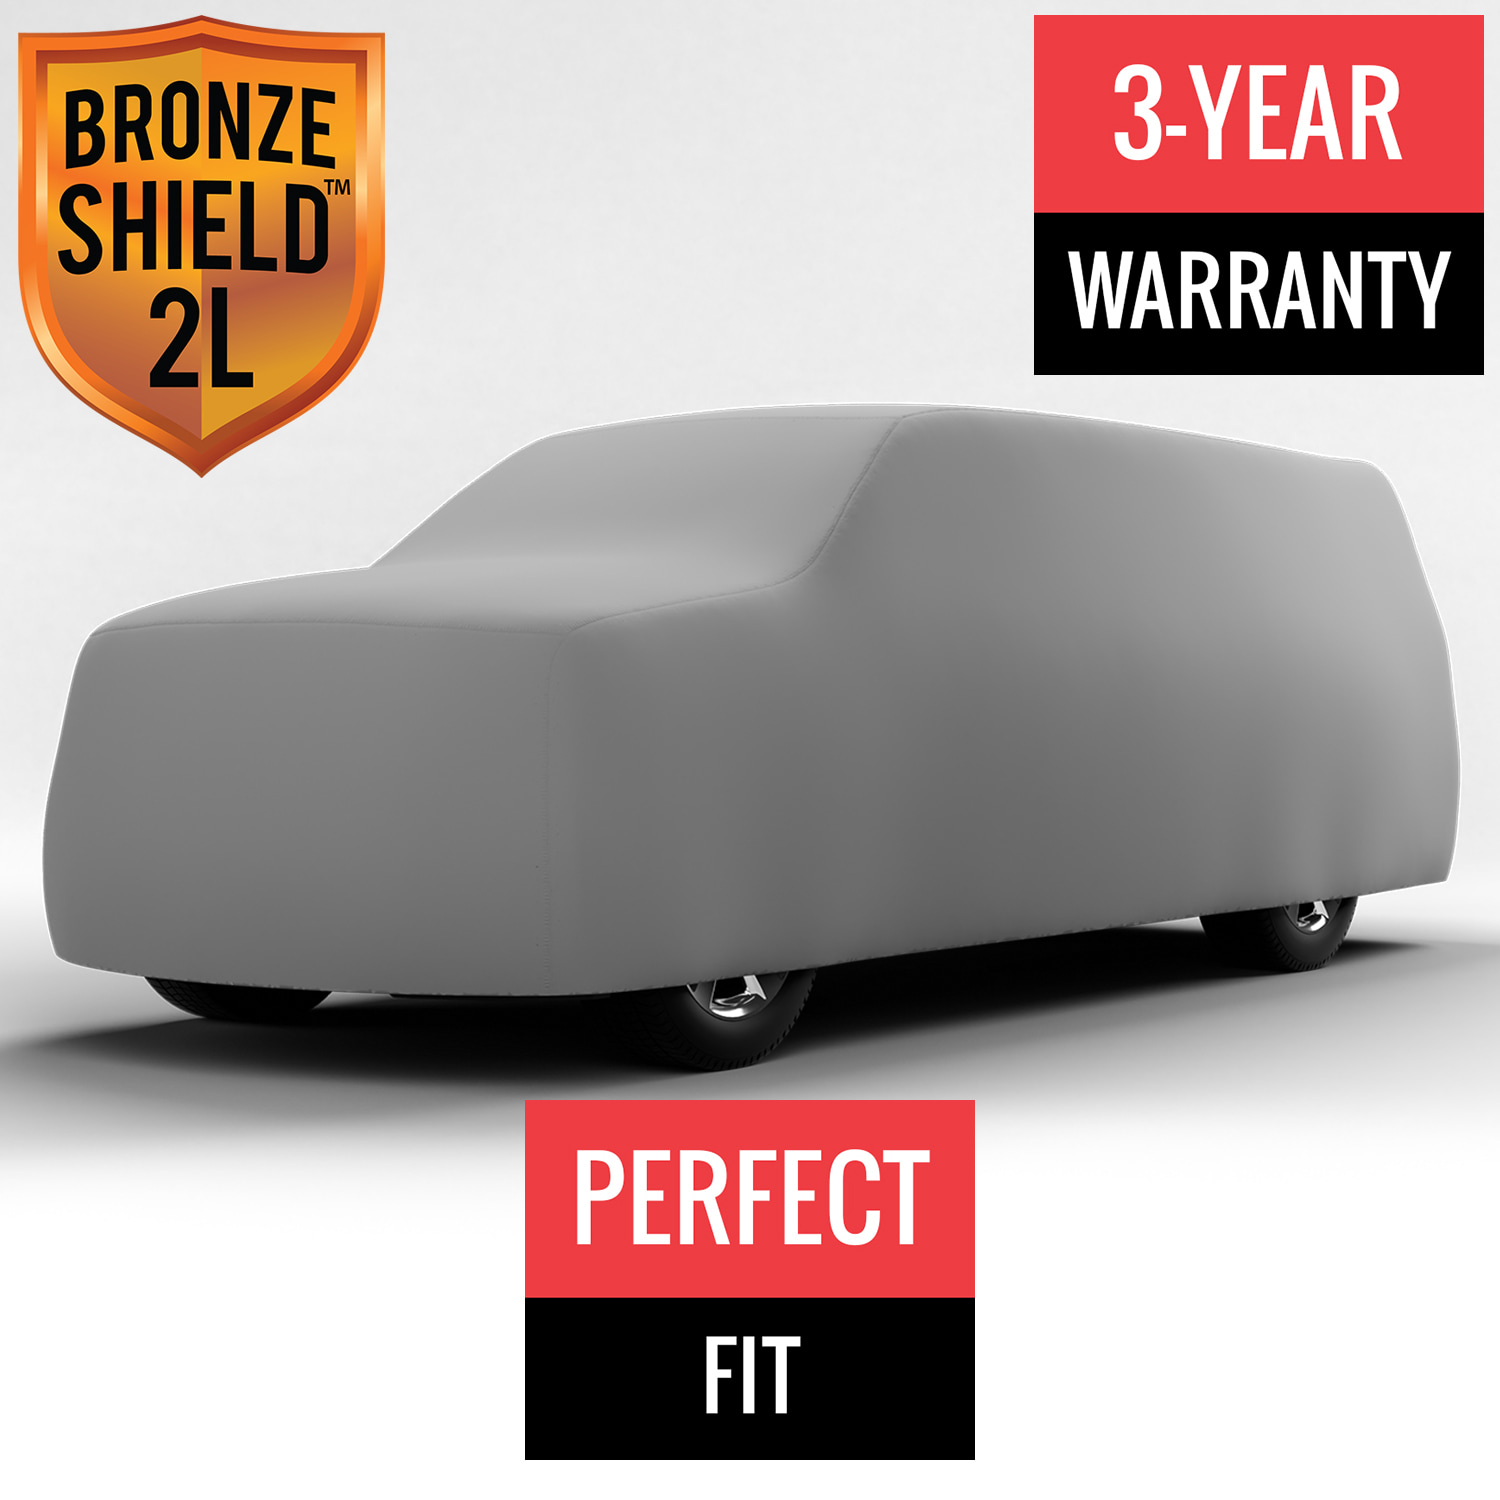 Bronze Shield 2L - Car Cover for GMC C1500 1997 Regular Cab Pickup 6.5 Feet Bed with Camper Shell